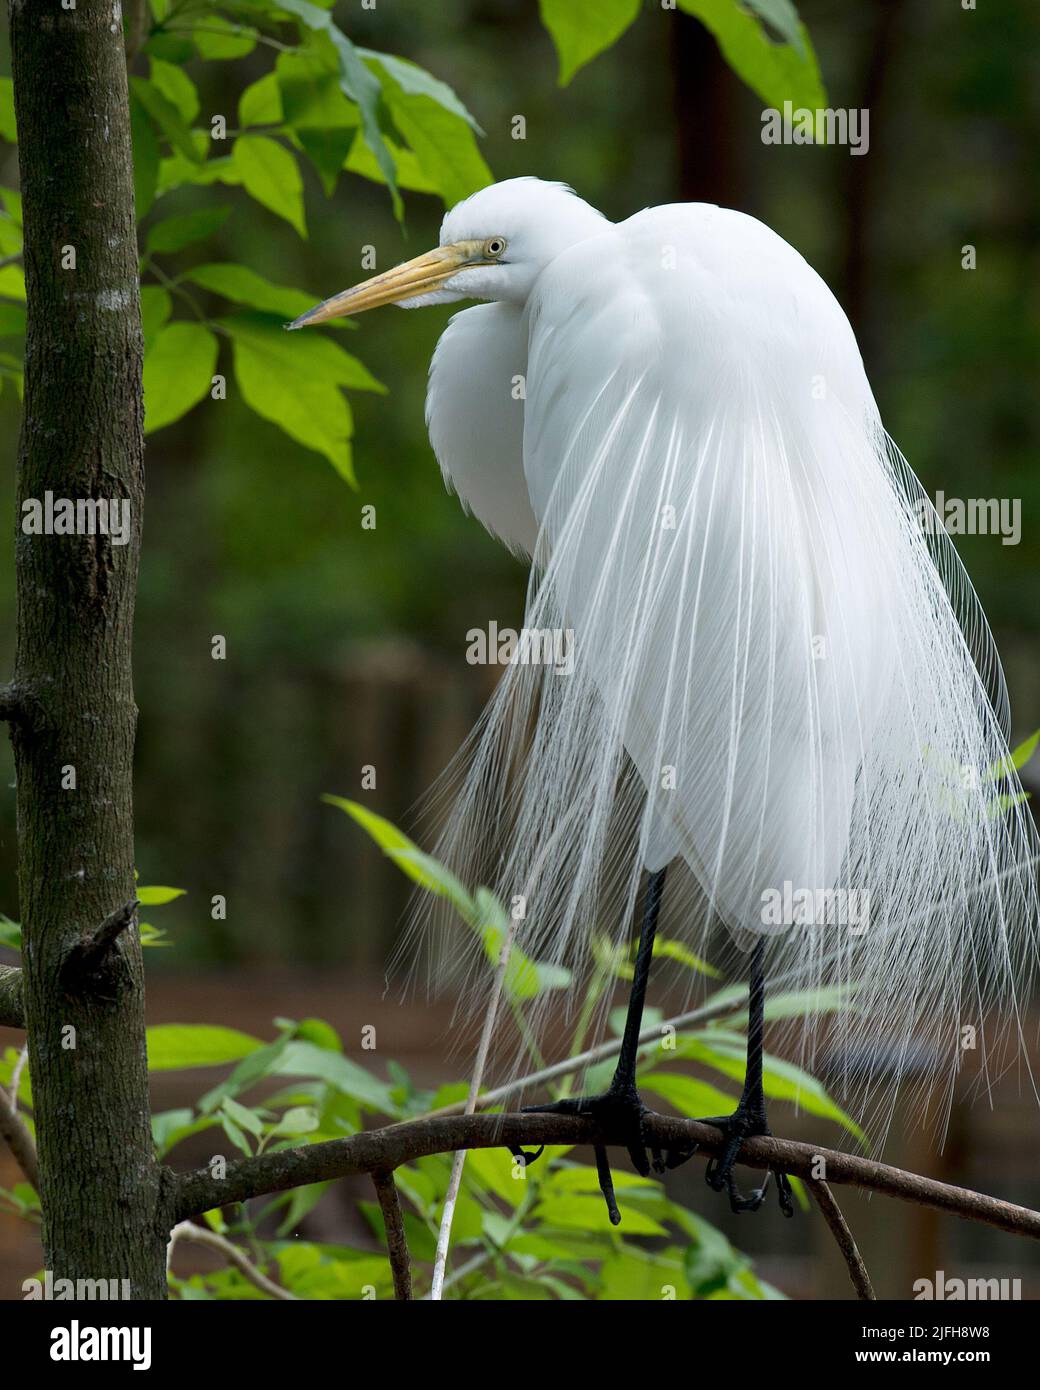 Great White Egret close-up profile view with a blur background, displaying long yellow beak, eye, white feathers plumage with a blur background. Egret Stock Photo